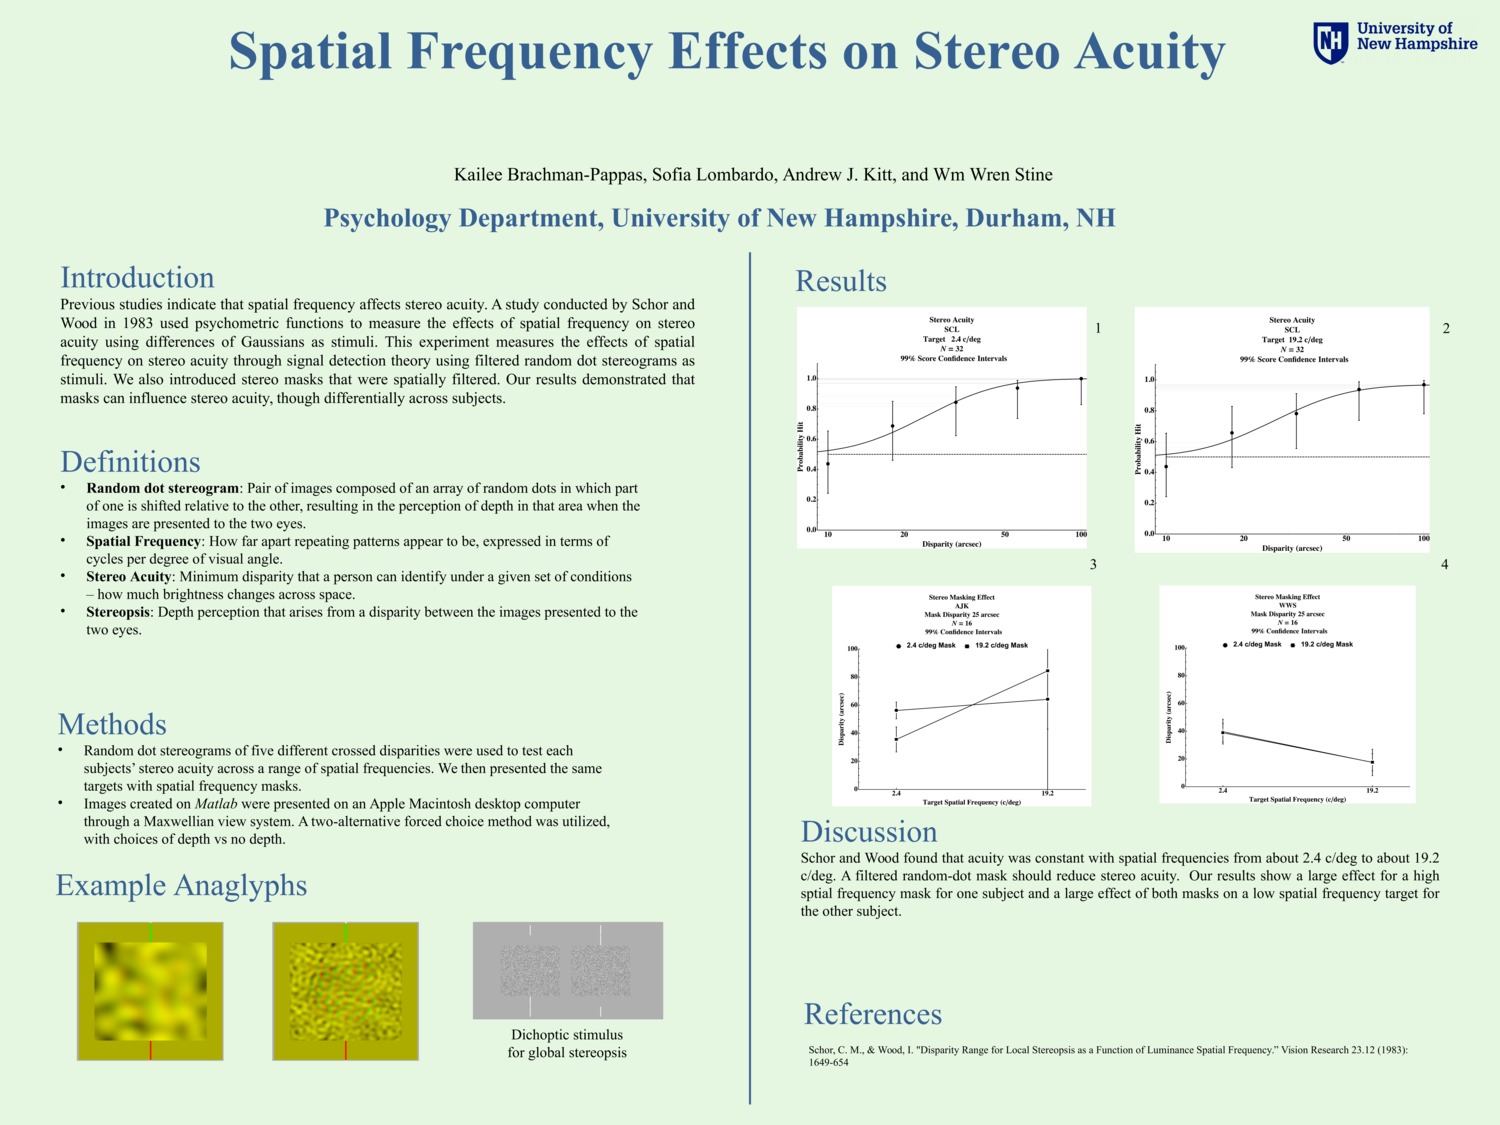 Spatial Frequency Effects On Stereo Acuity by scl1001